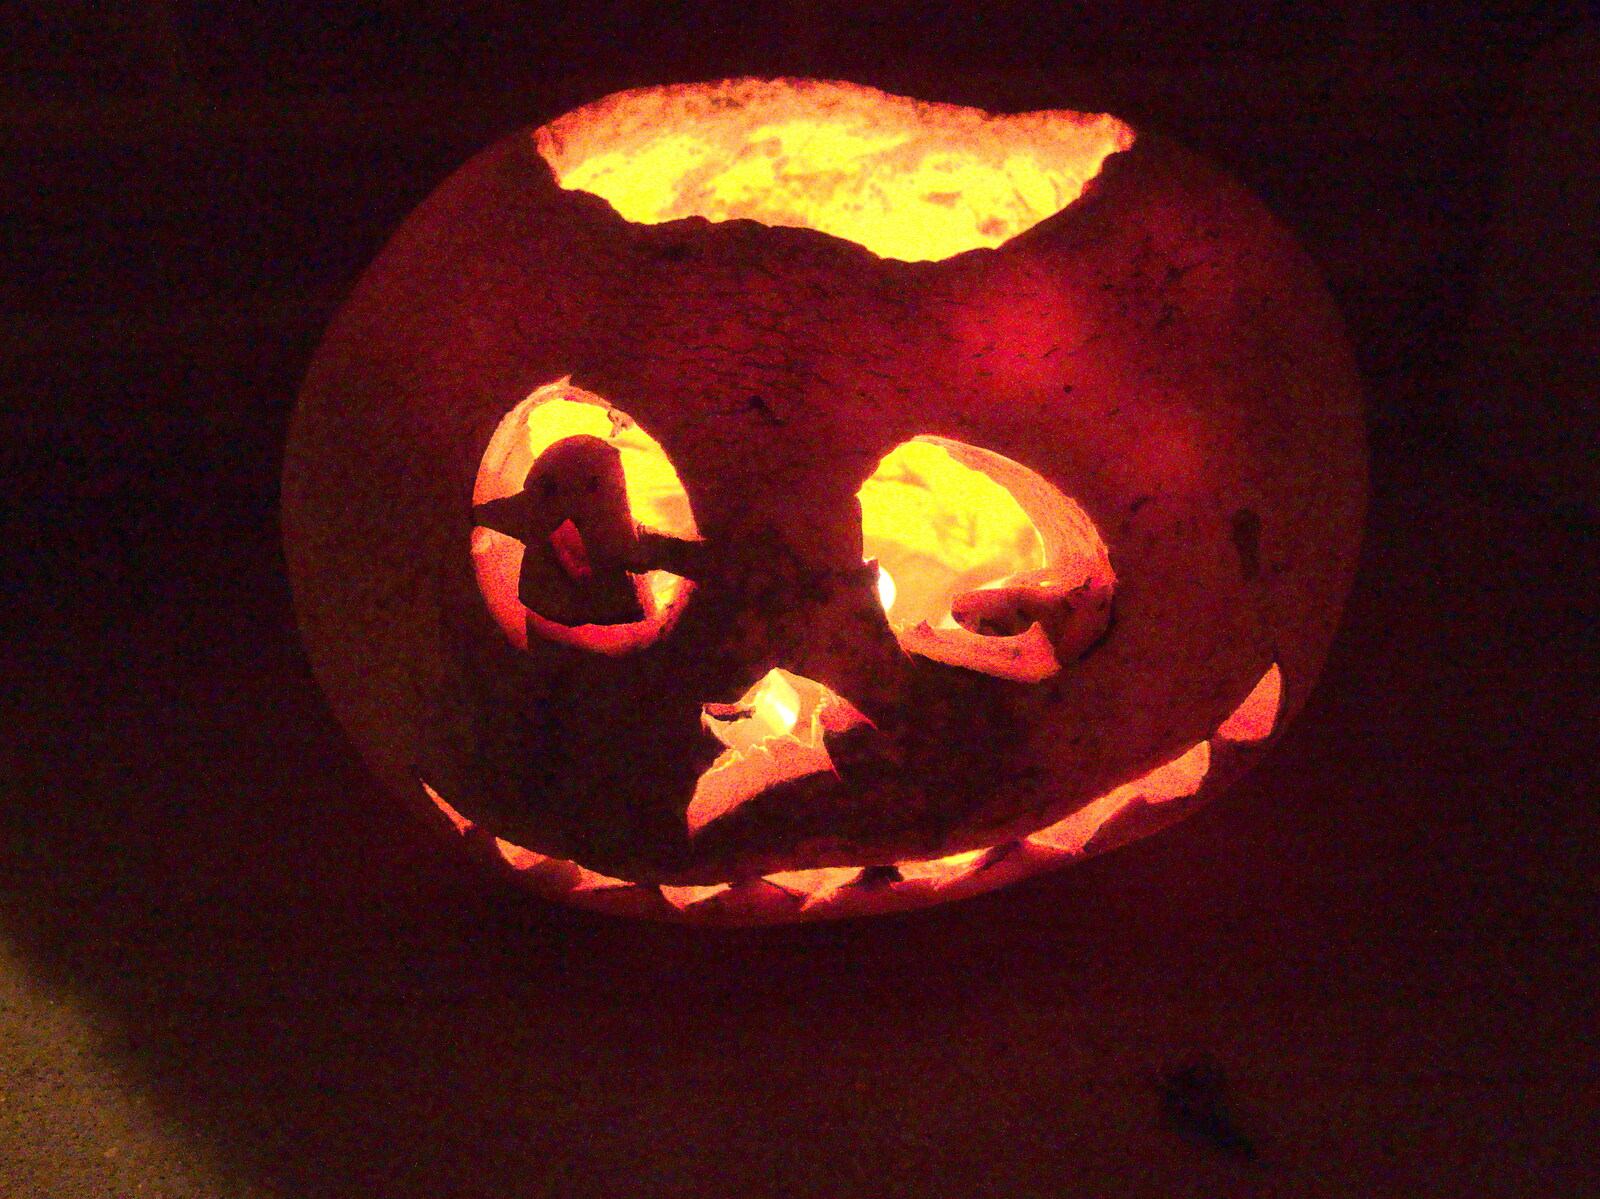 Our Hallowe'en pumpkin from the garden from John Willy's 65th and Other Stories, The Swan, Brome, Suffolk - 31st October 2015